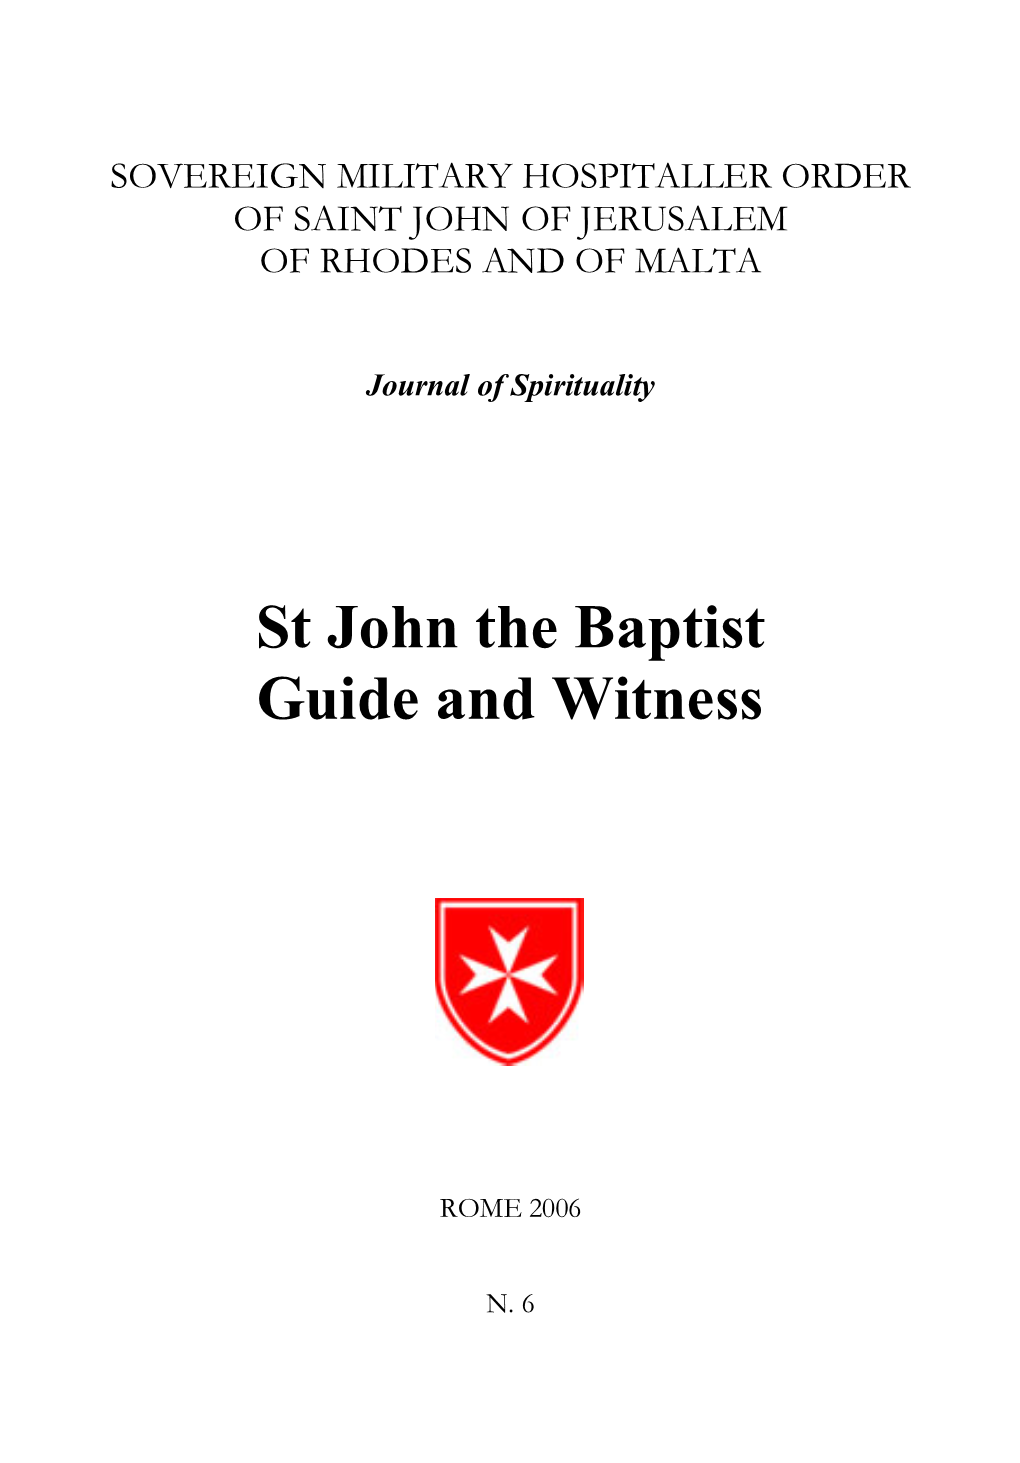 St John the Baptist Guide and Witness